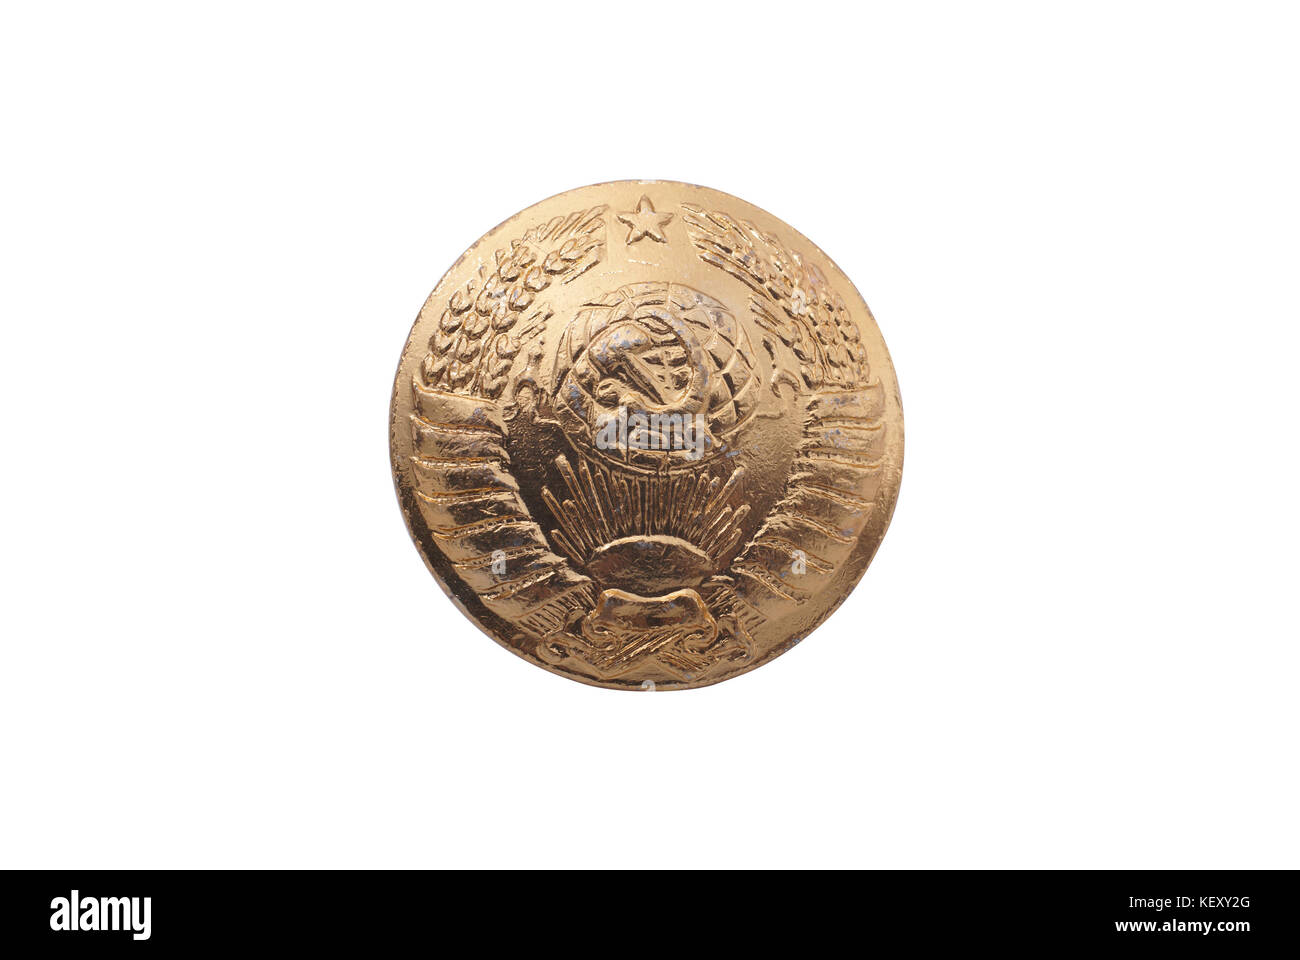 Button from soviet (USSR) army uniform. State Emblem of USSR on golden color button. Path on white background Stock Photo